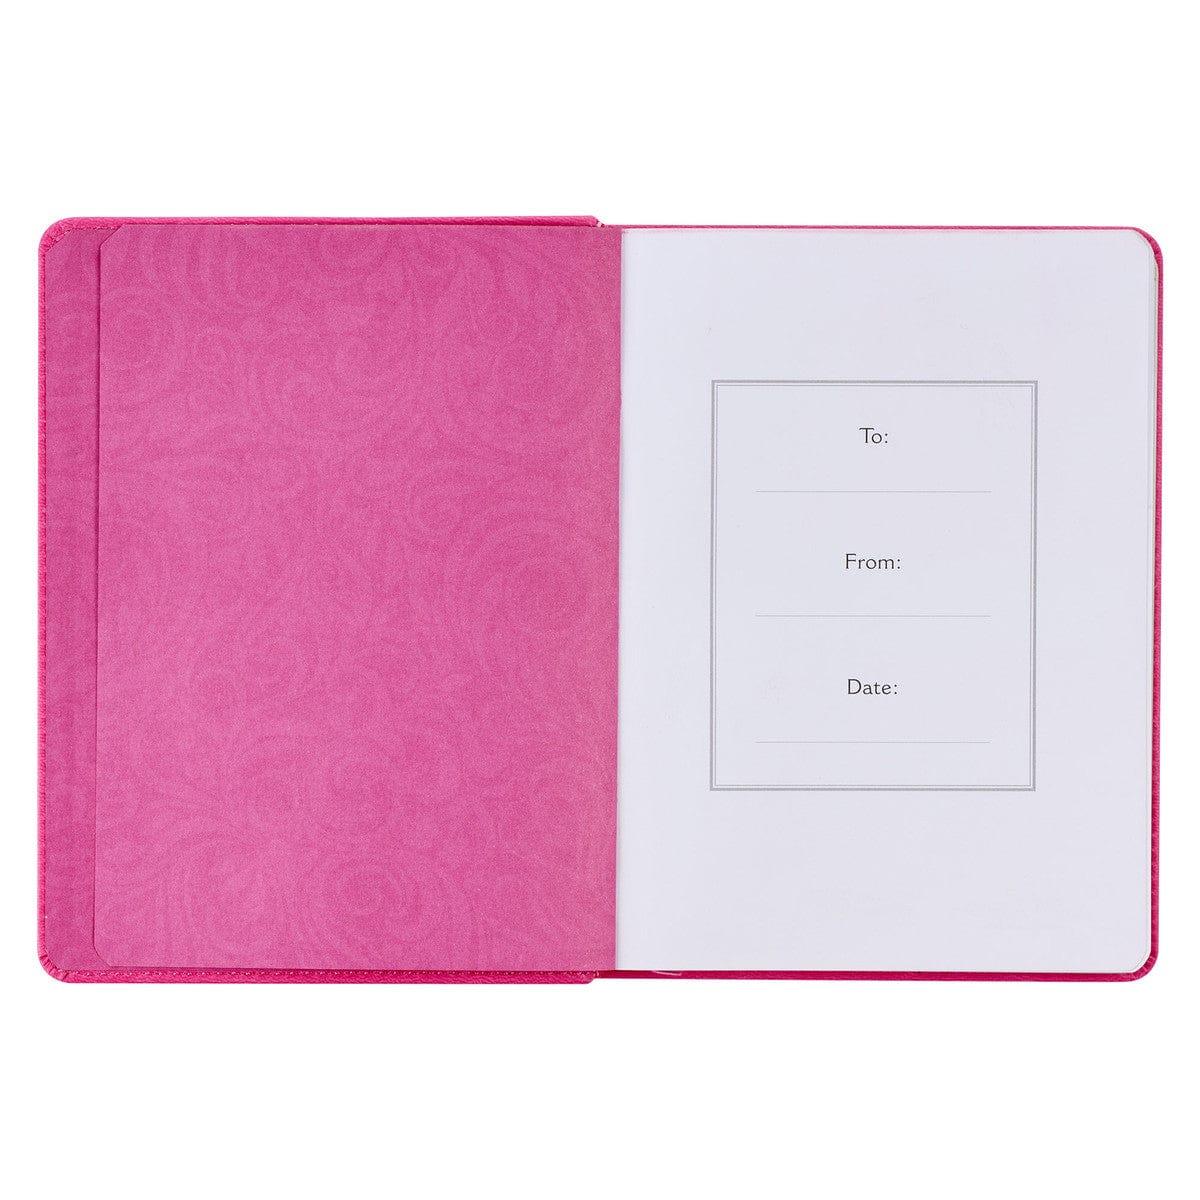 She is Brave Pink Faux Leather Handy-size Journal - Pura Vida Books